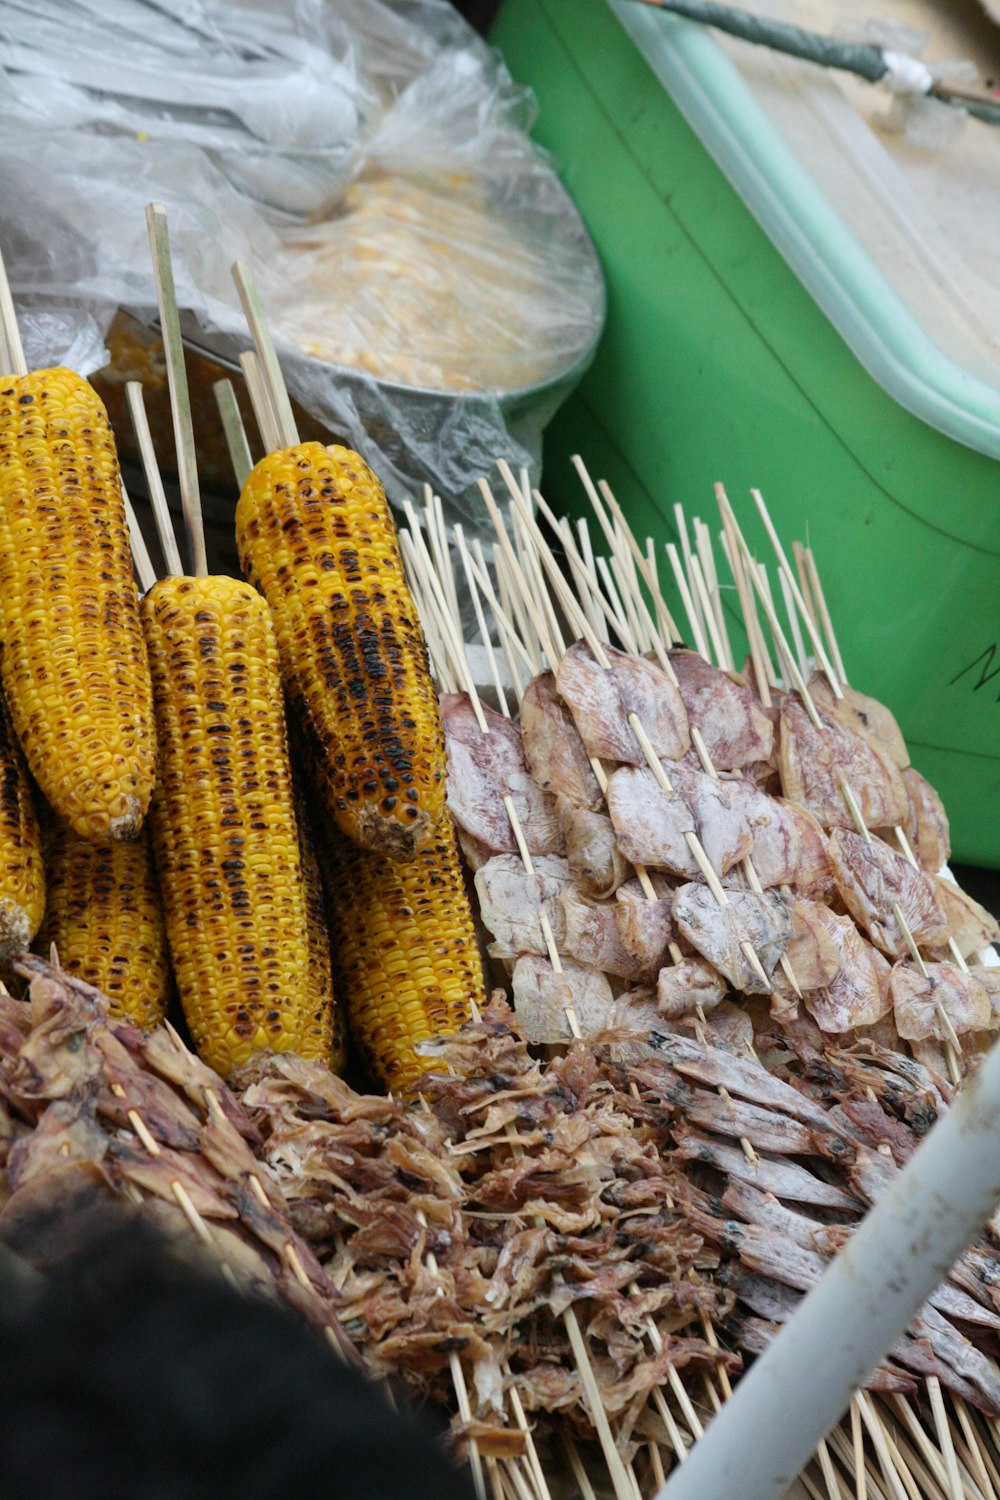 piles of barbecued corns on sticks beside meat slices on sticks